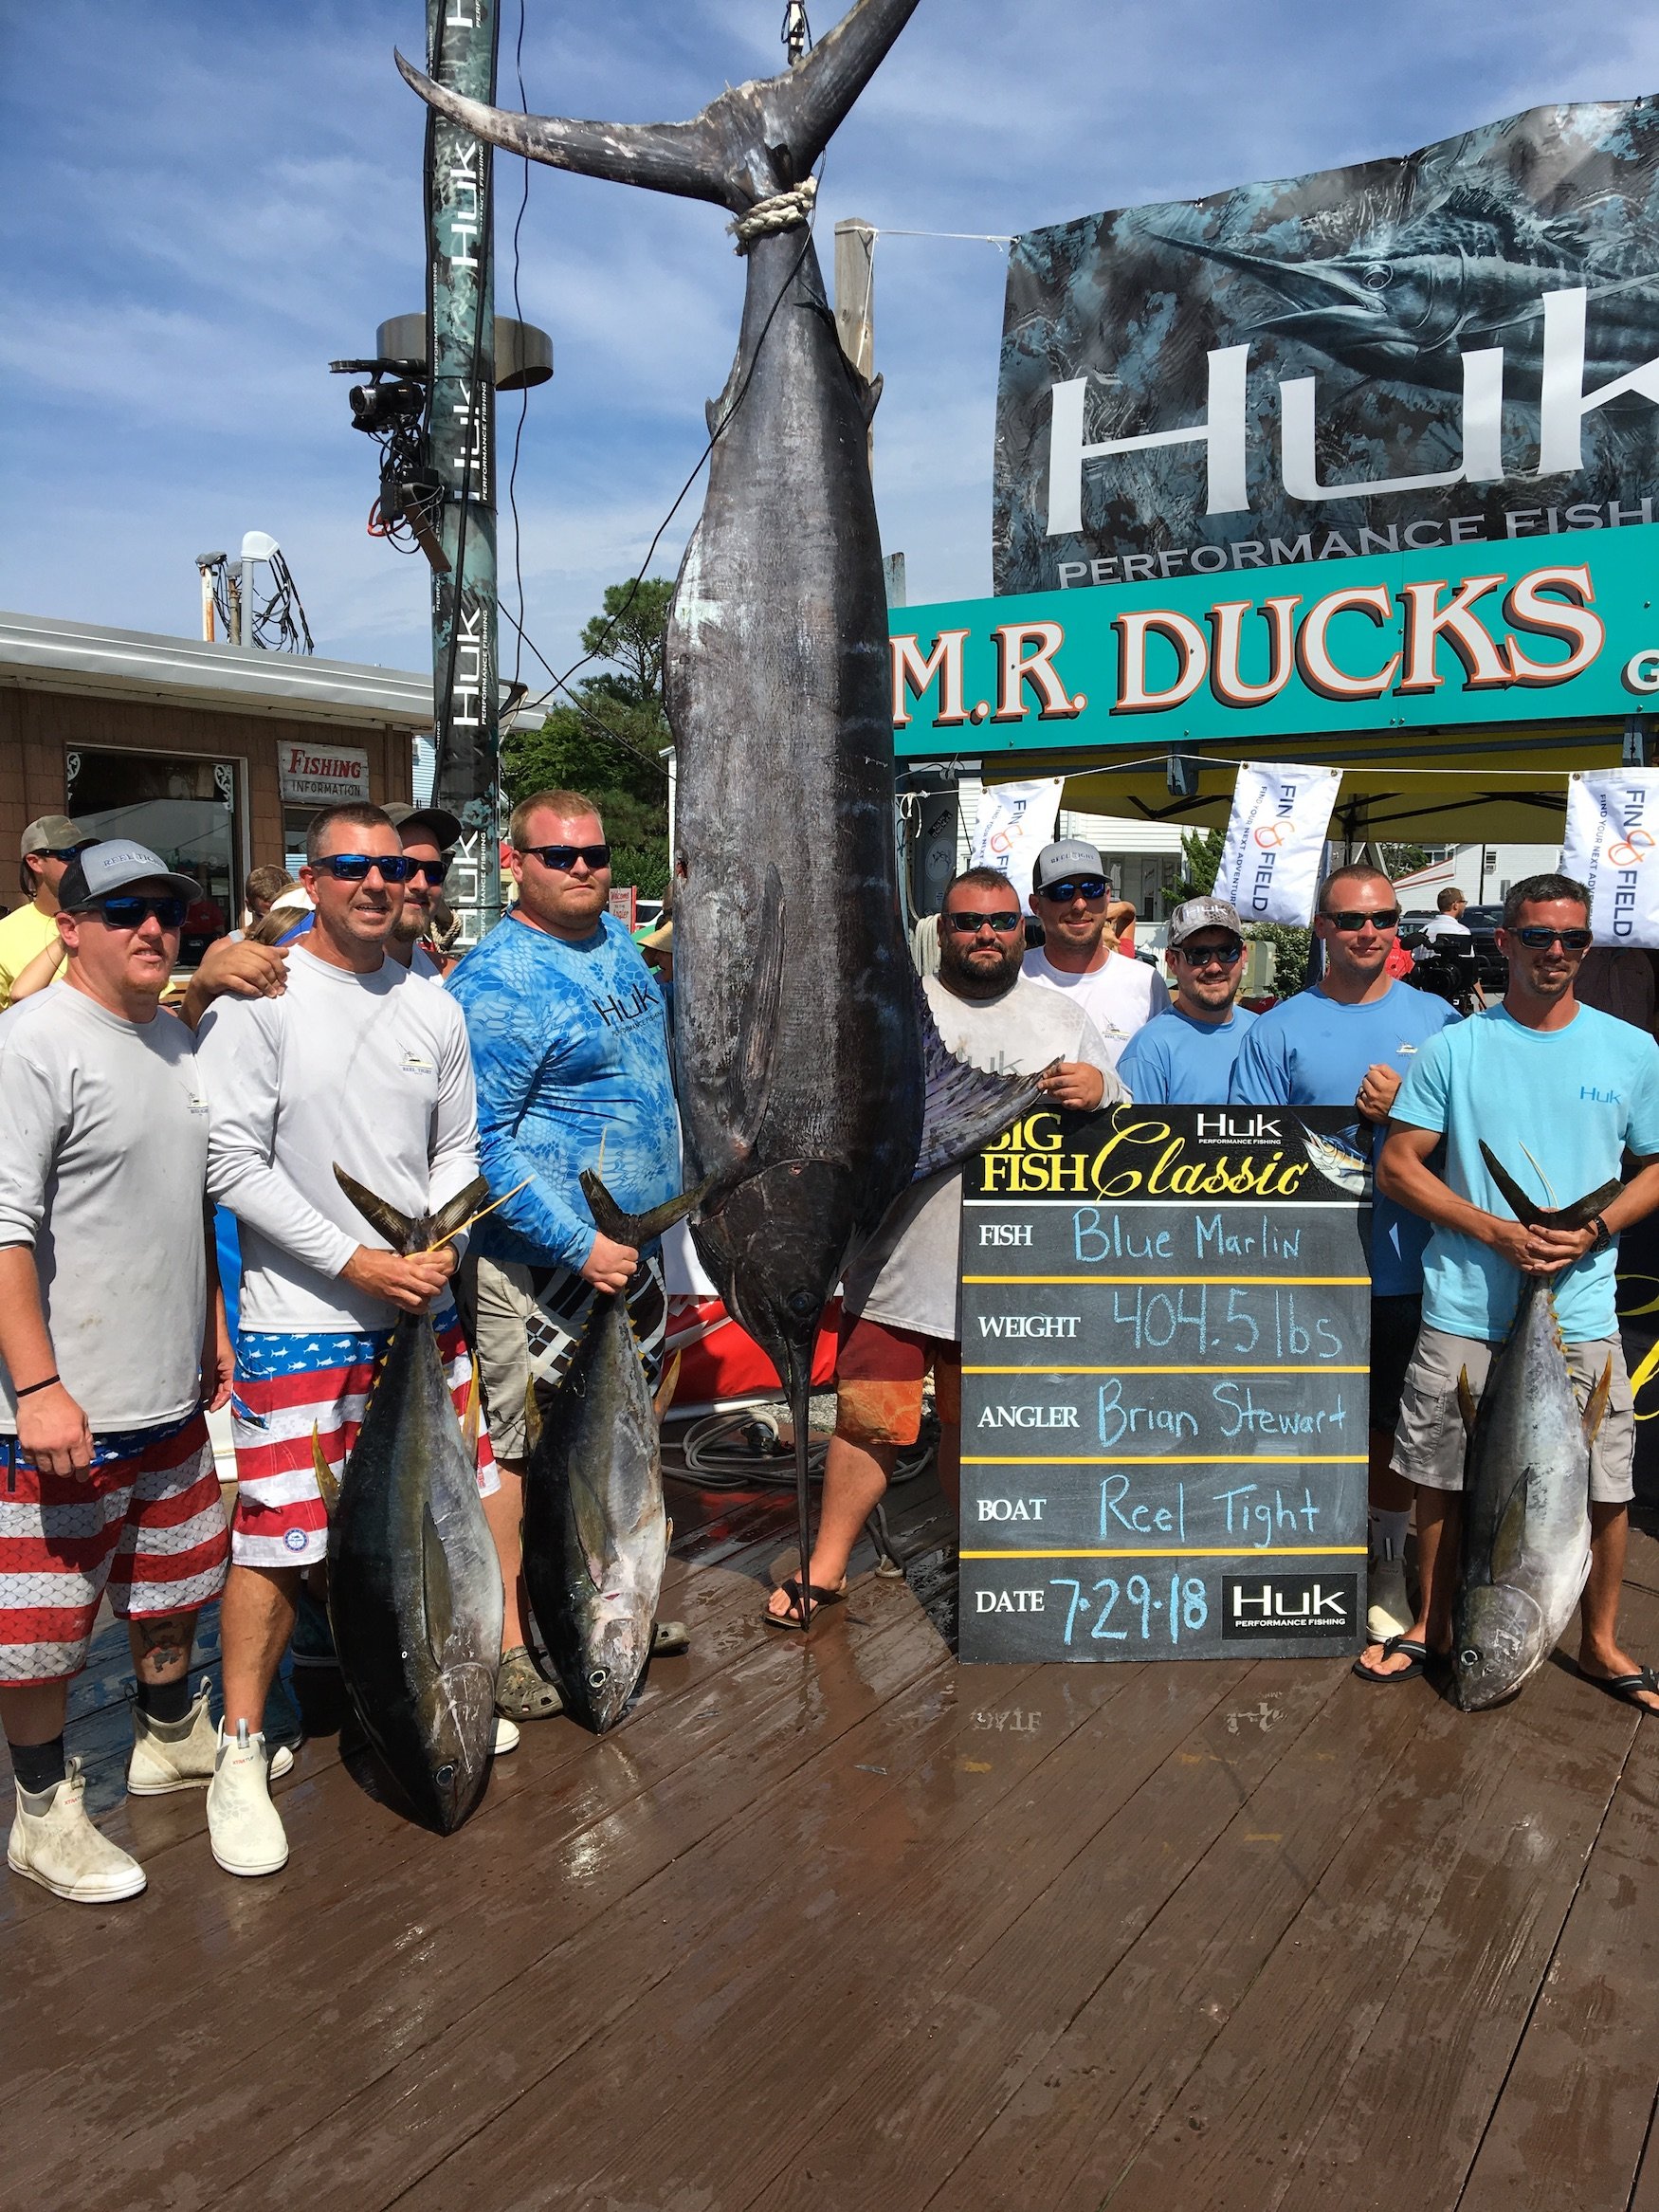 Reel Tight Wins Over $240,000 in HUK Big Fish Classic - Ocean City MD  Fishing